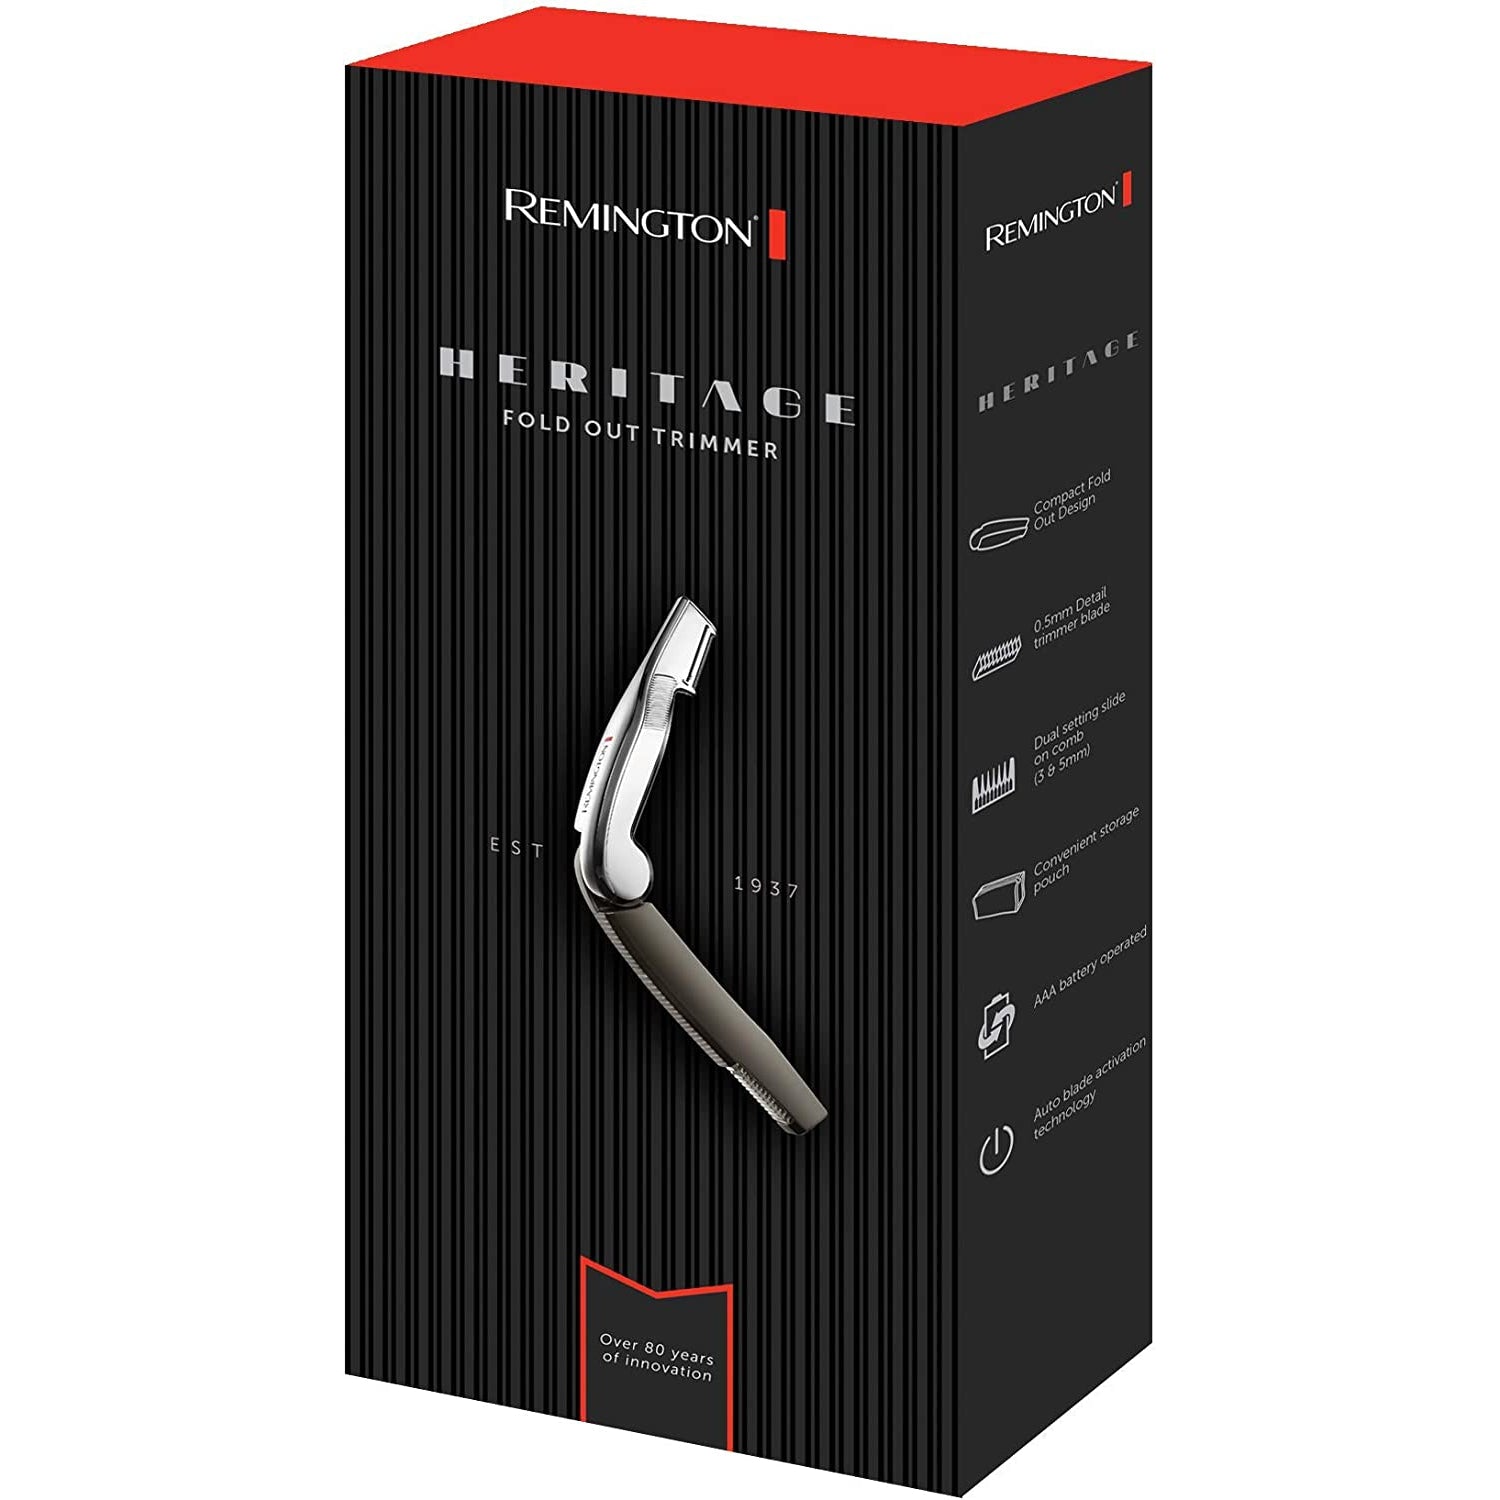 Remington MPT1000 Heritage Detail Beard Trimmer and Beard Comb, Silver - Healthxpress.ie